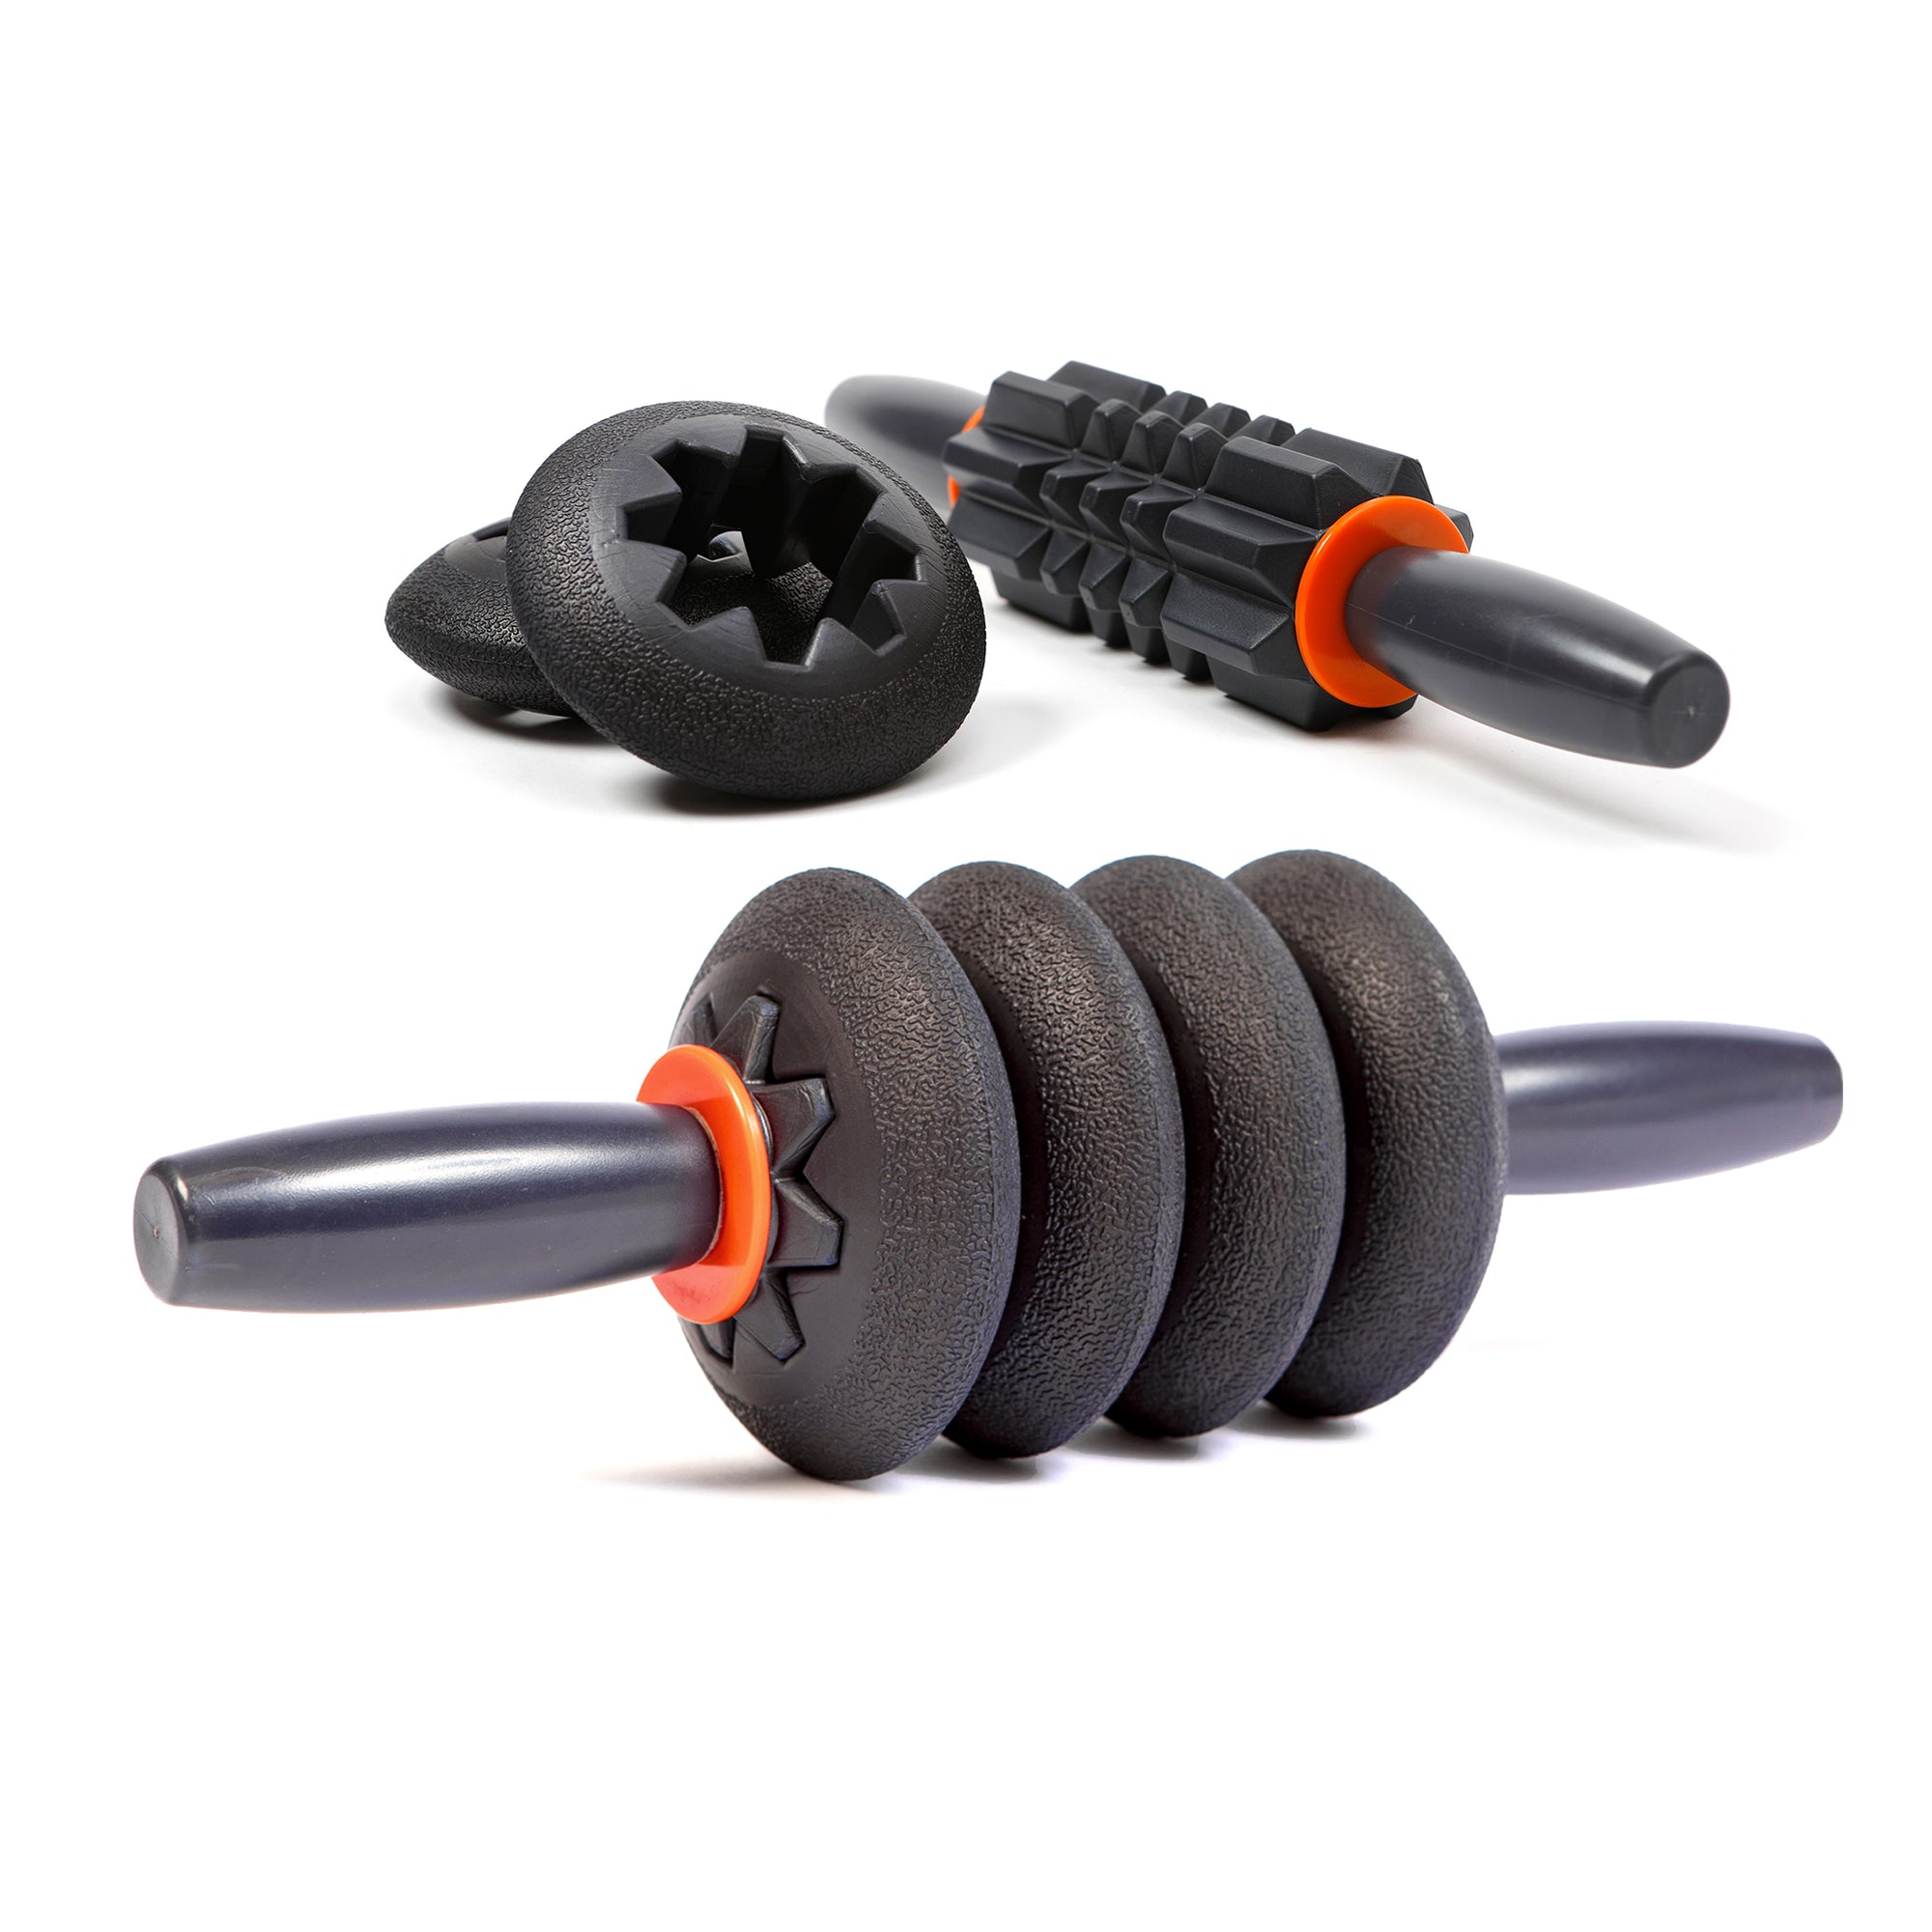 morph massage stick in different configurations